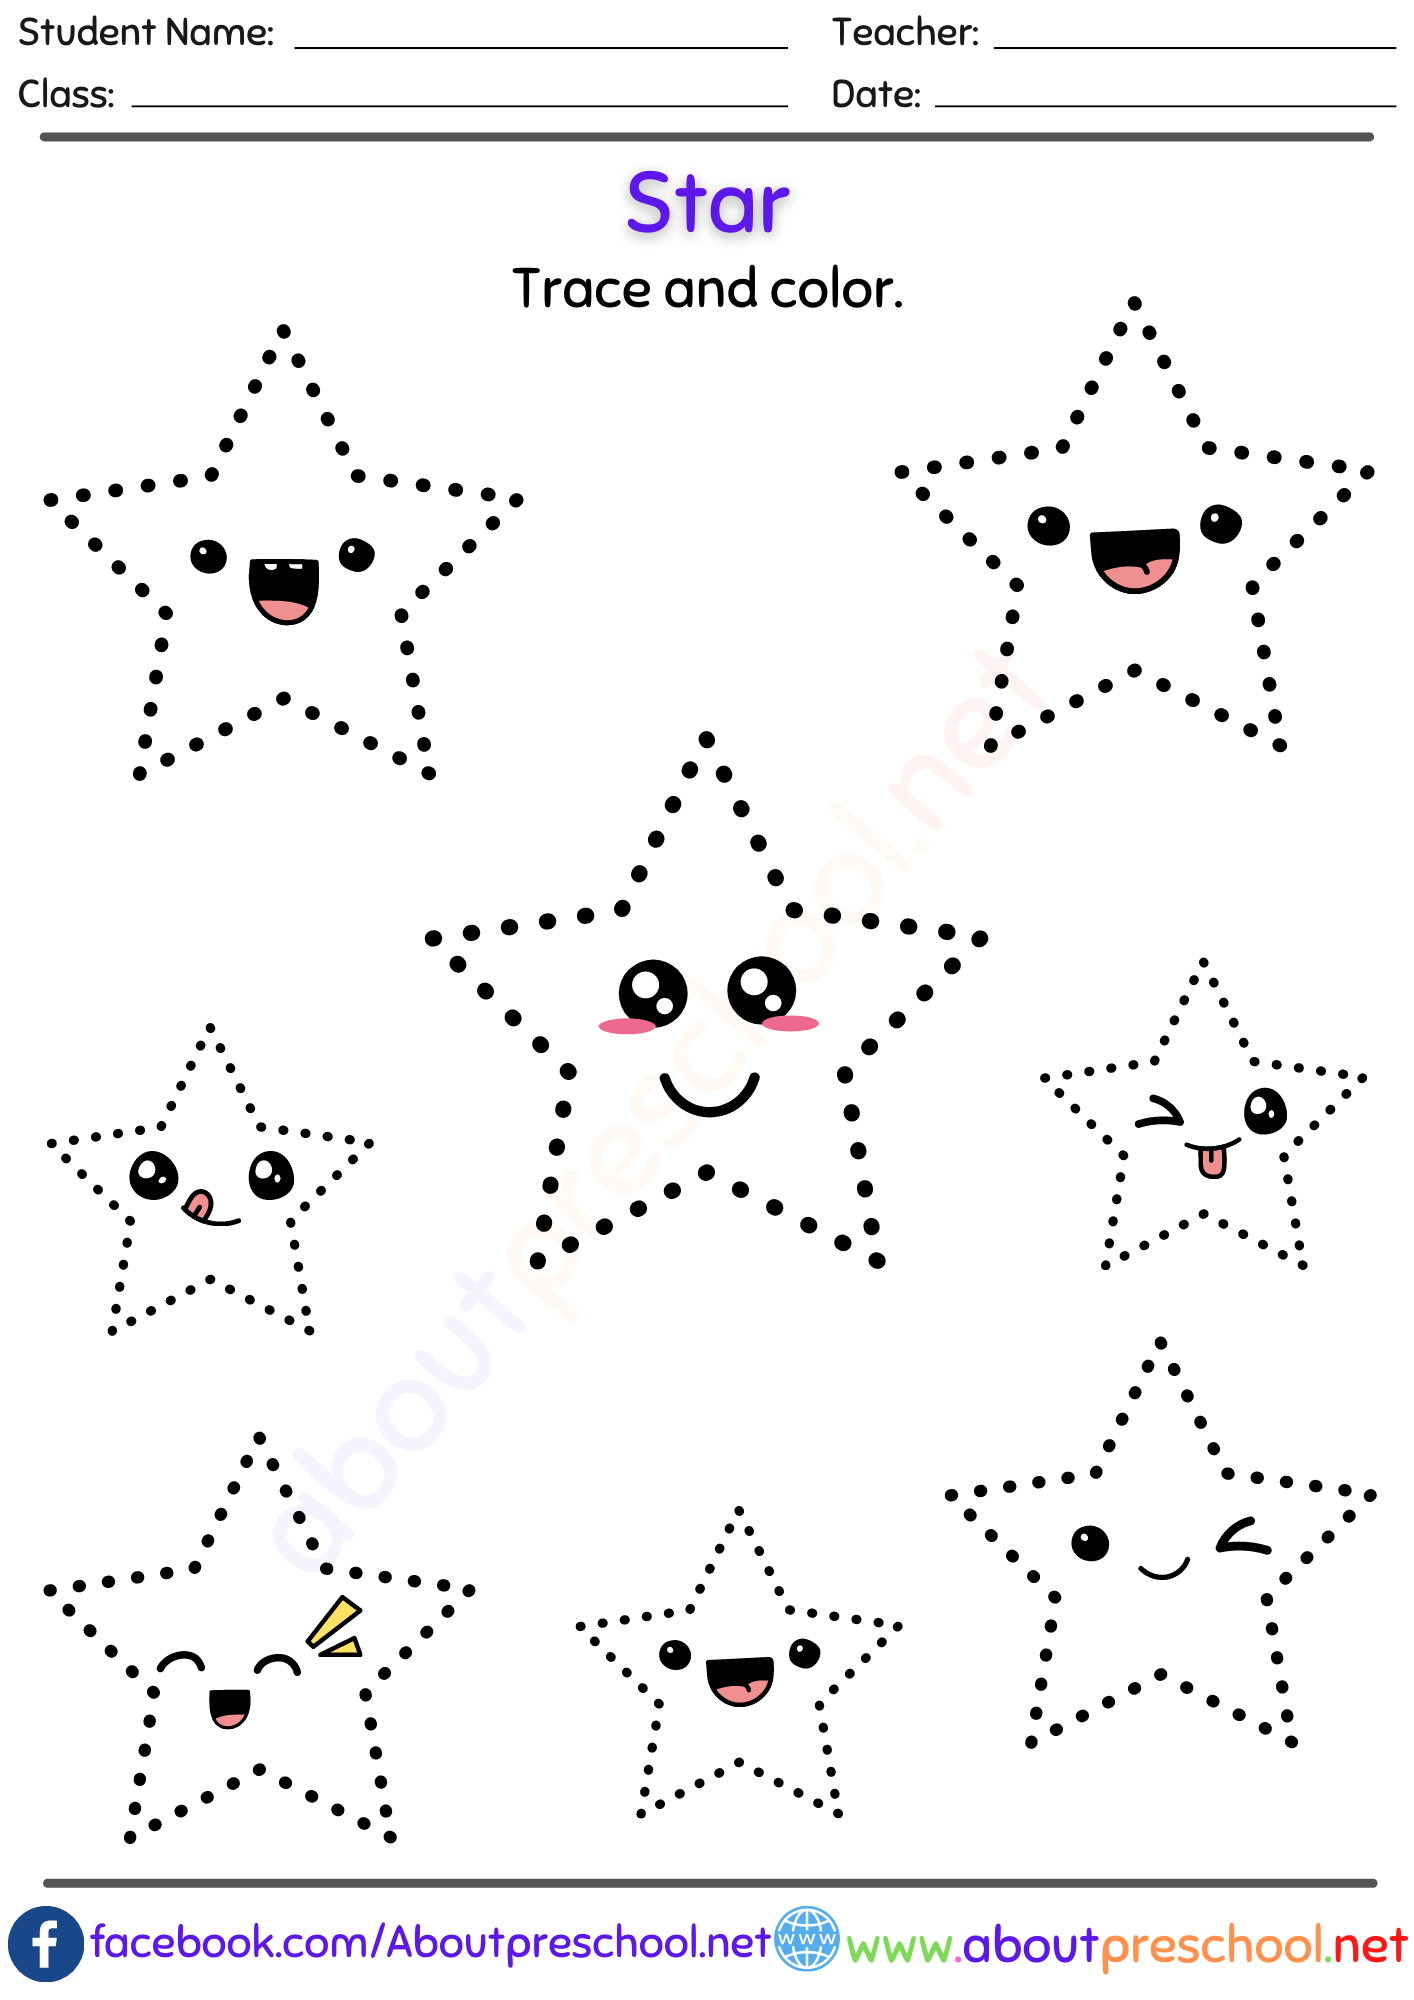 Free Shapes trace and color worksheet Star